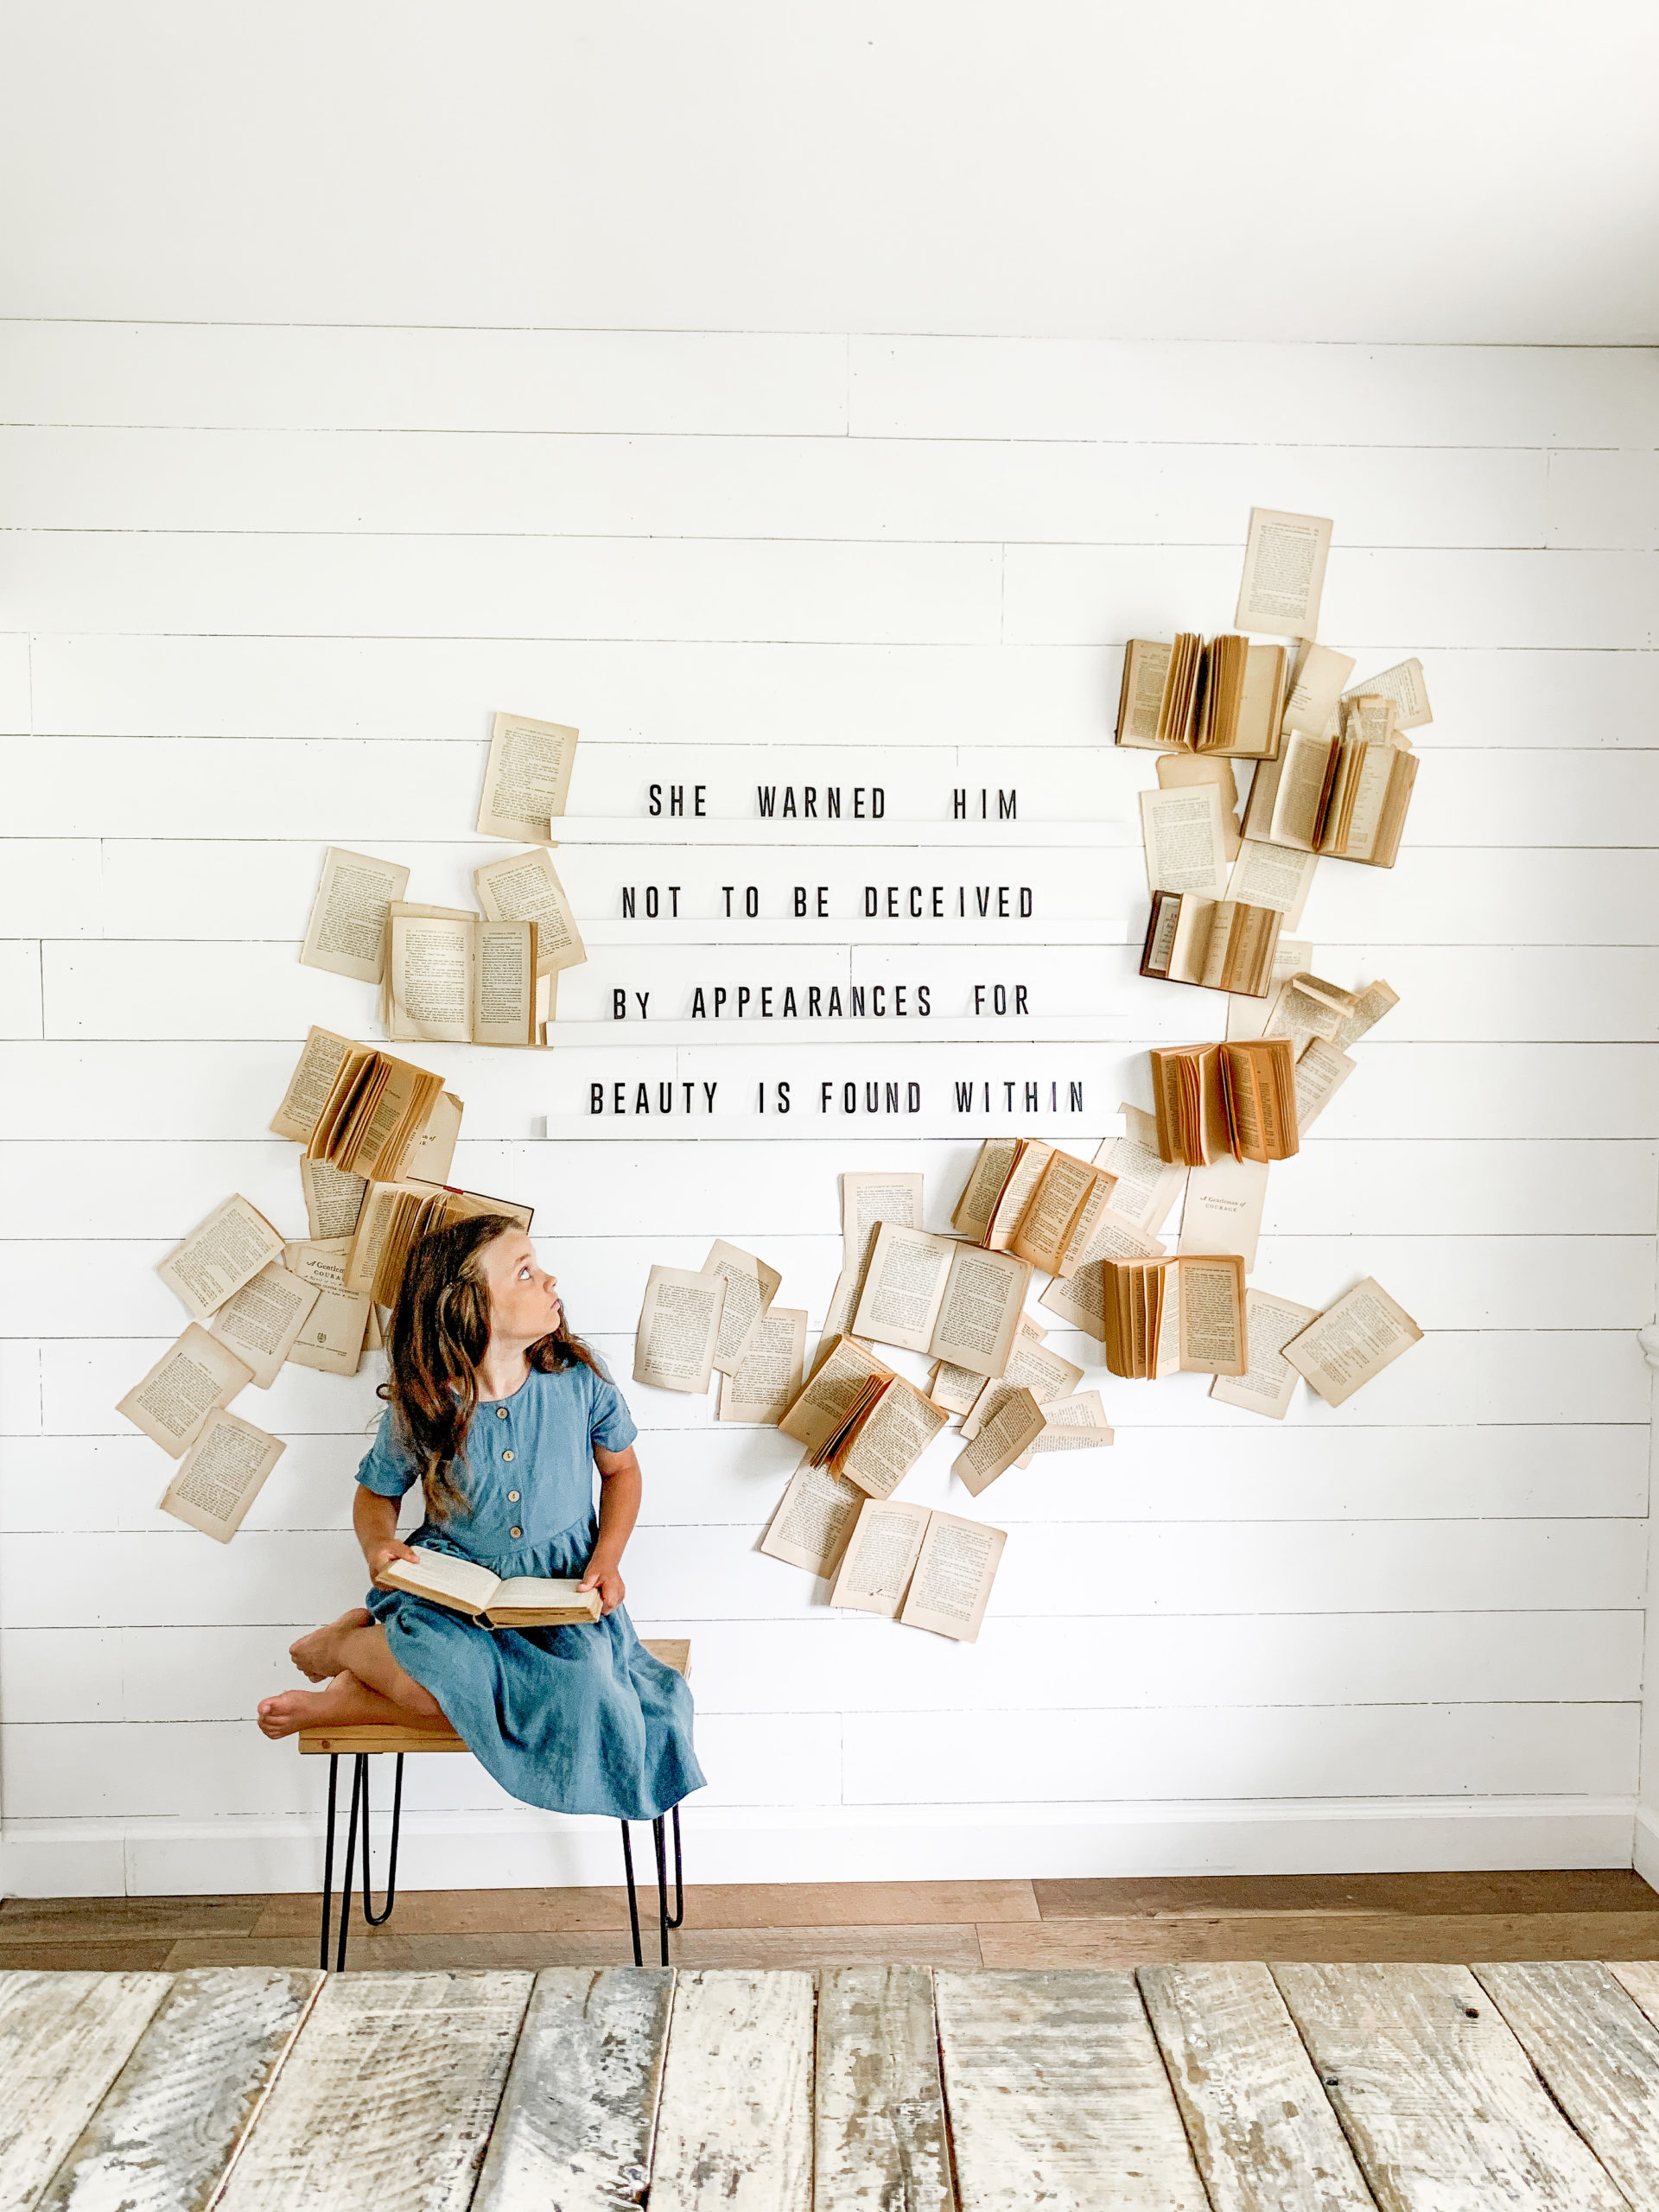 How To Make An Epic DIY Book Wall & Letter Board Display